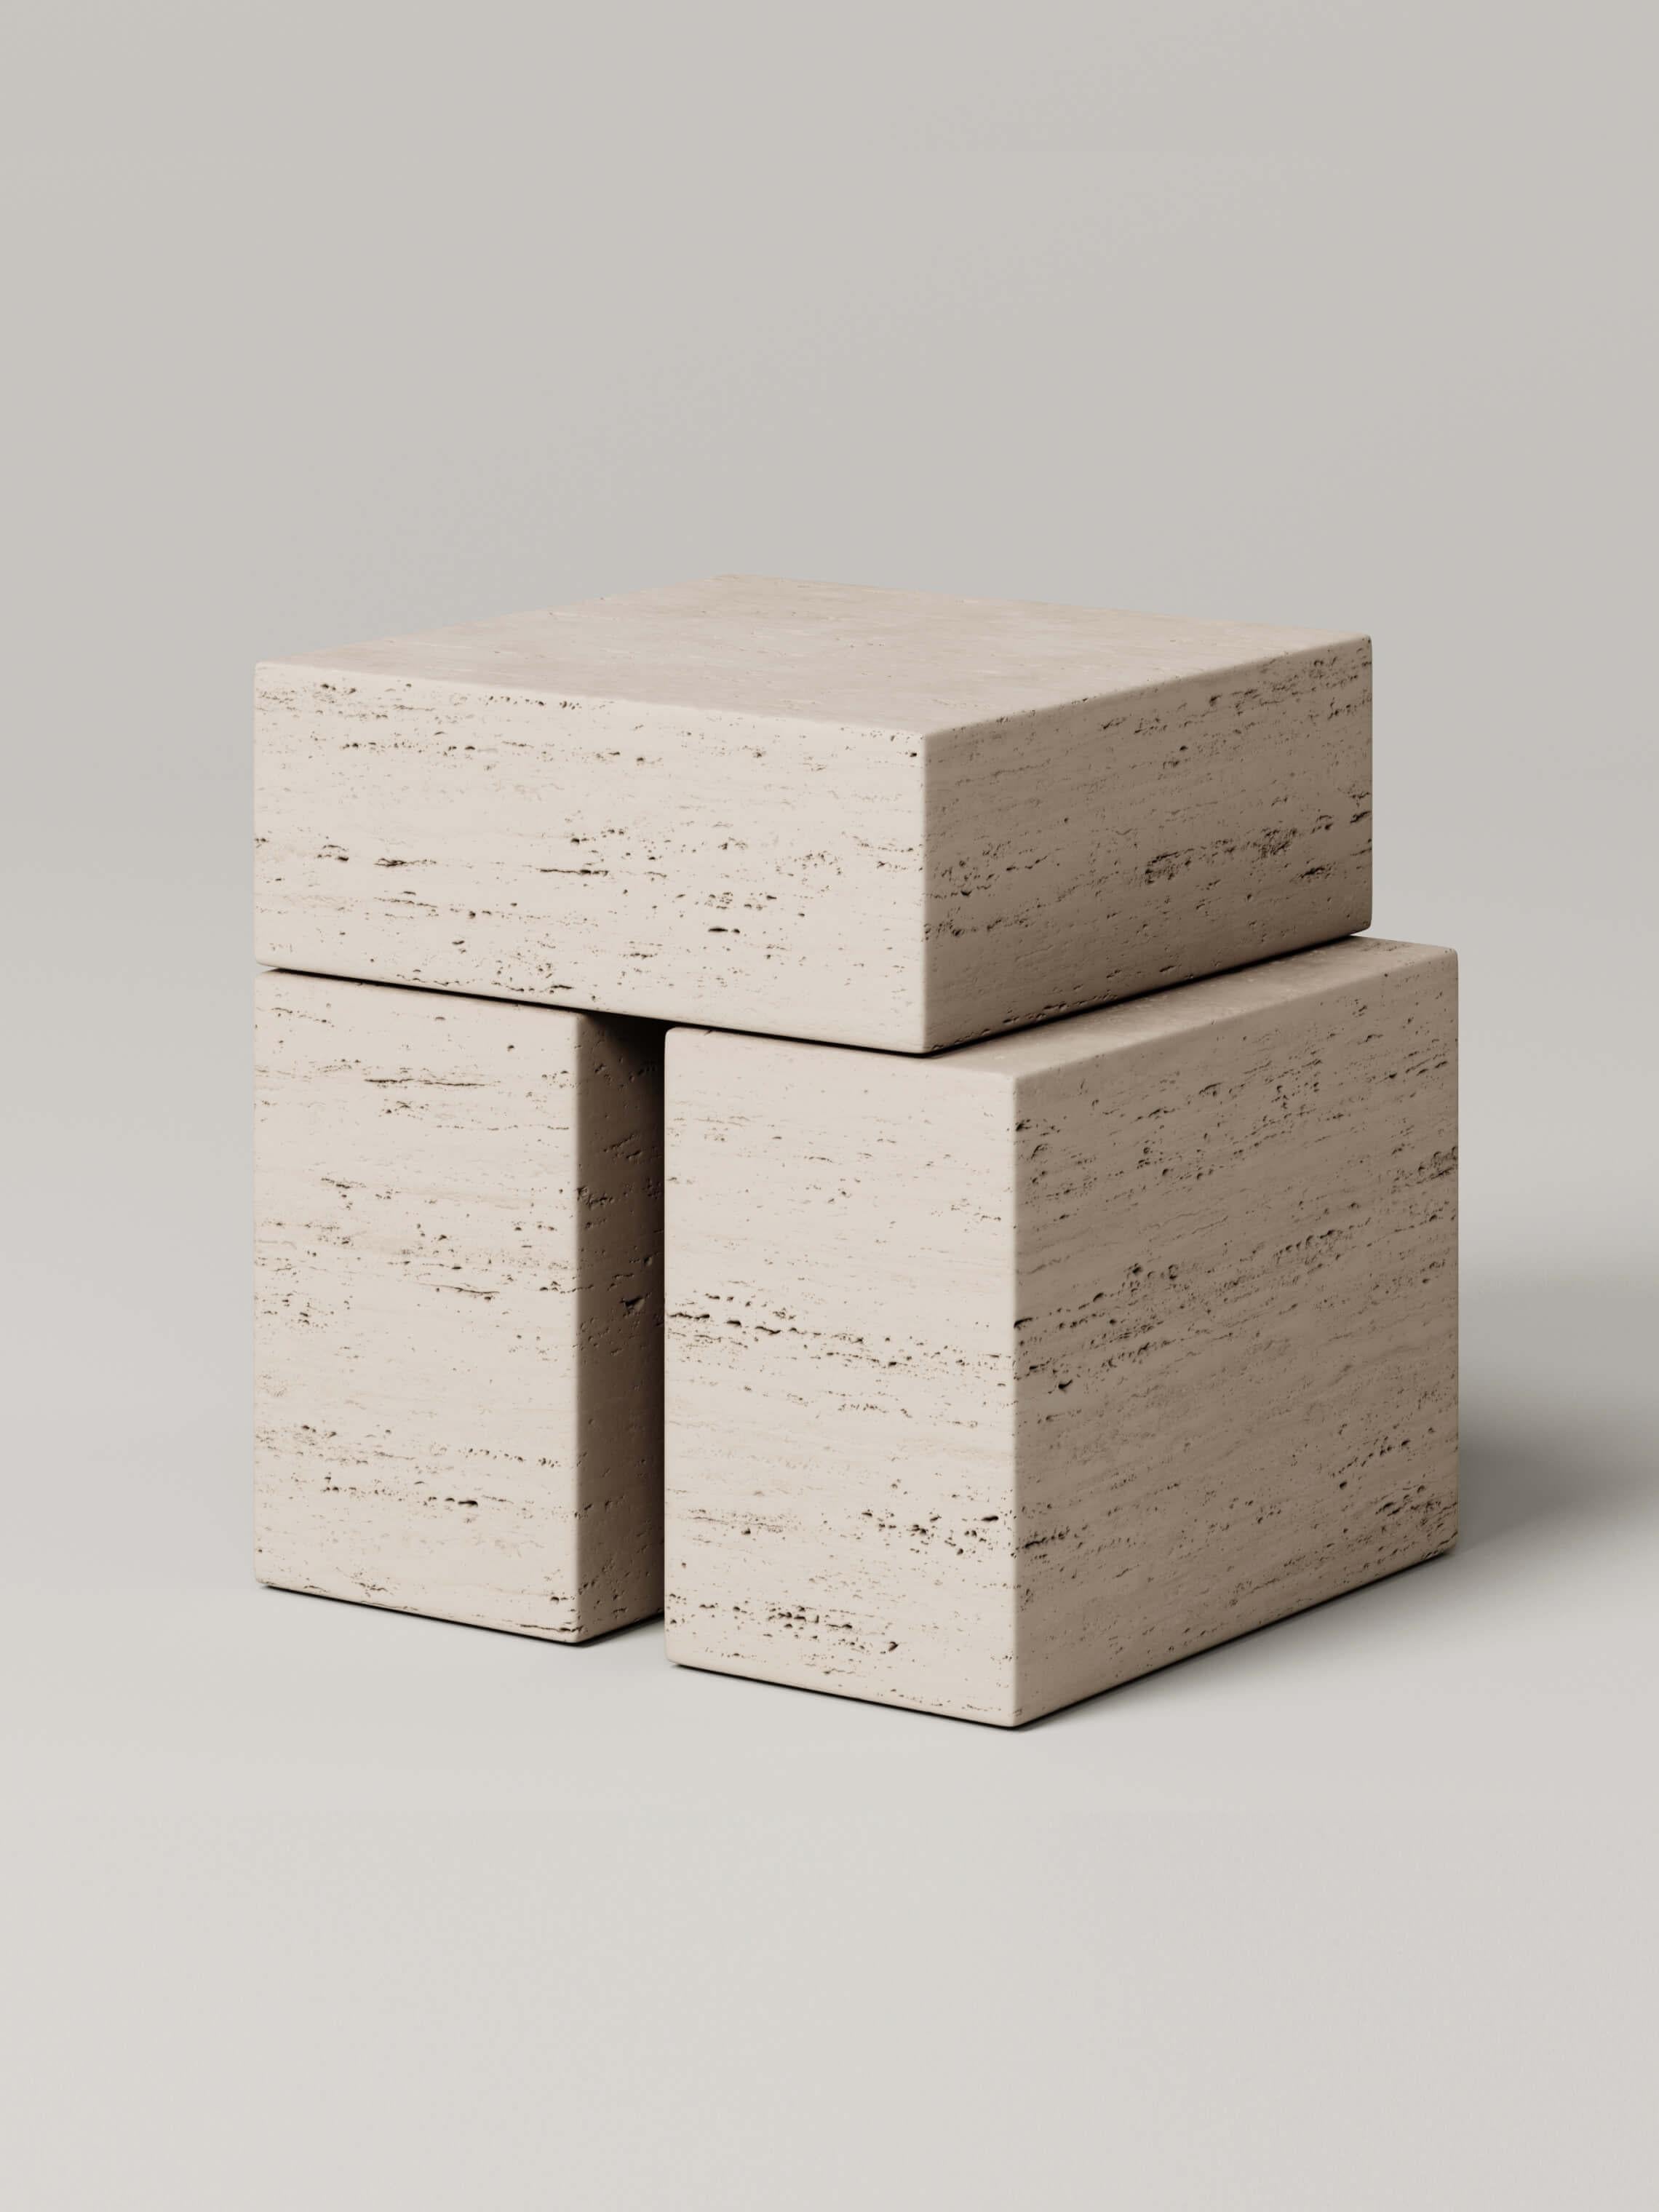 M_009 Travertine Side Table by Monolith Studio
Signed and Numbered.
Dimensions: D 40 x W 45 x H 45 cm.
Materials: Travertine.

Available in travertine, lava rock and white onyx (on request). Please contact us. 

Monolith, founded in 2022 by Marc